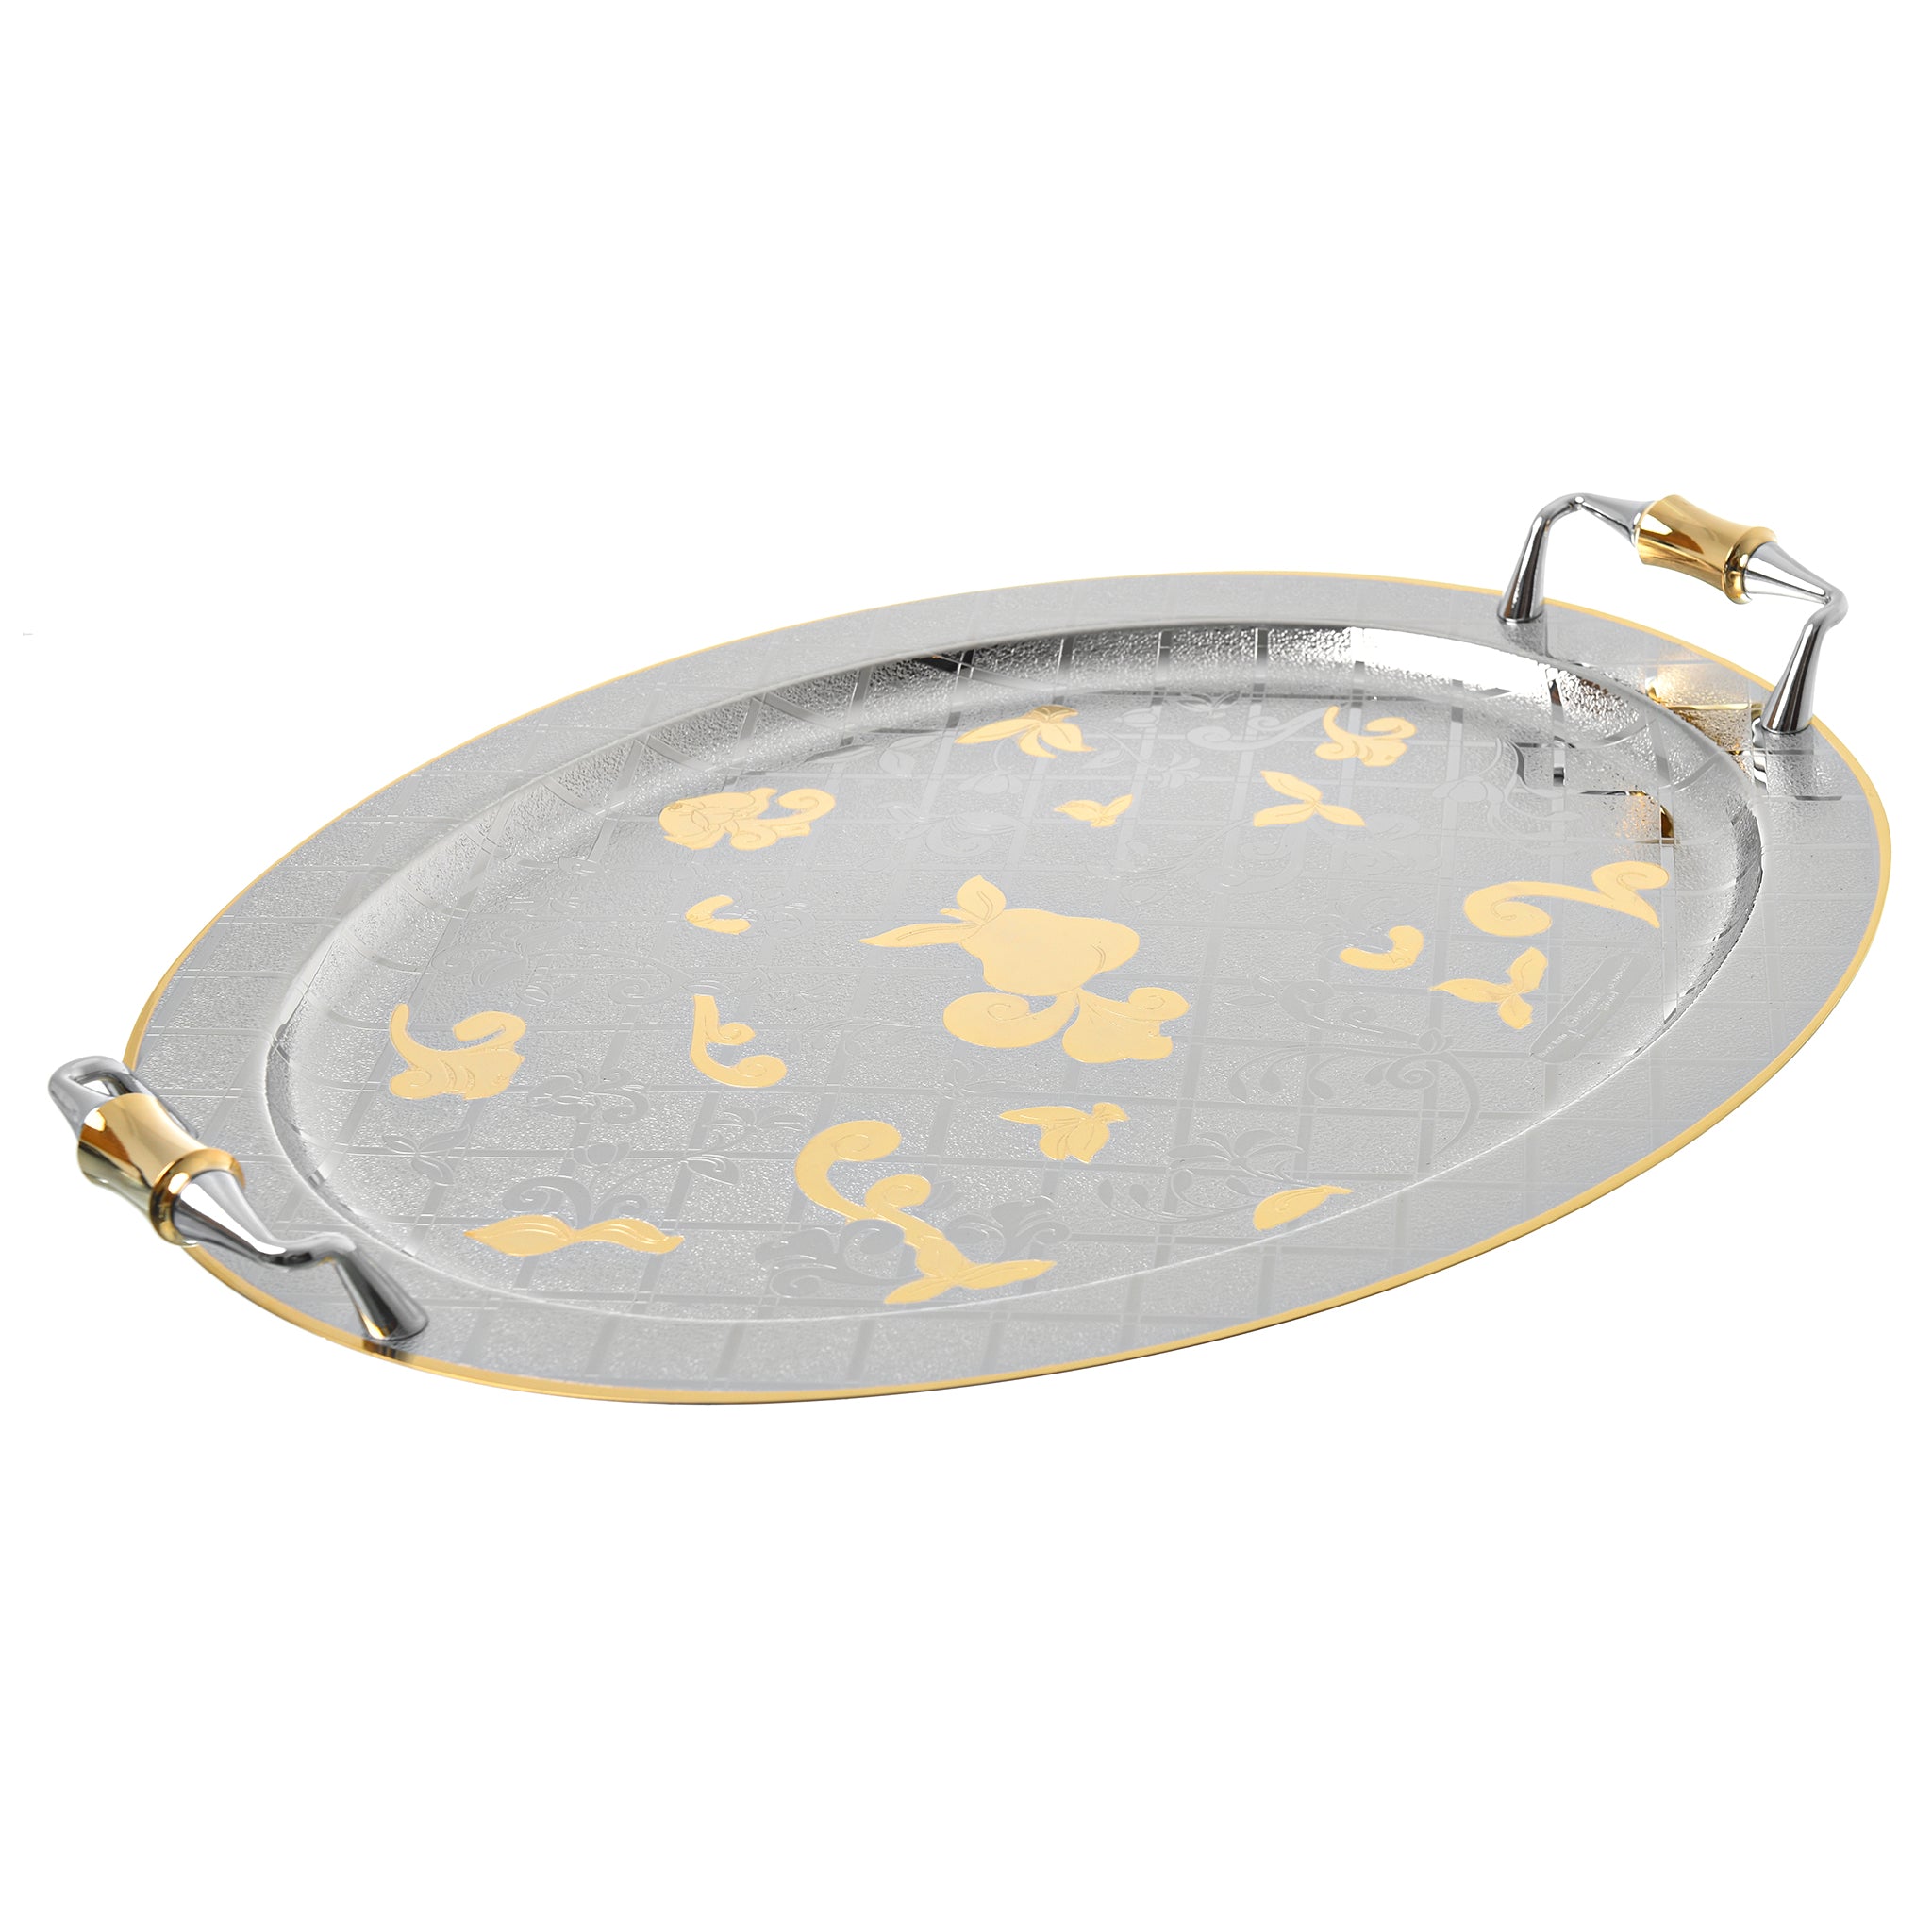 Elegant Gioiel - Oval Tray with Handles - Gold - Stainless Steel 18/10 - 48cm - 75000326